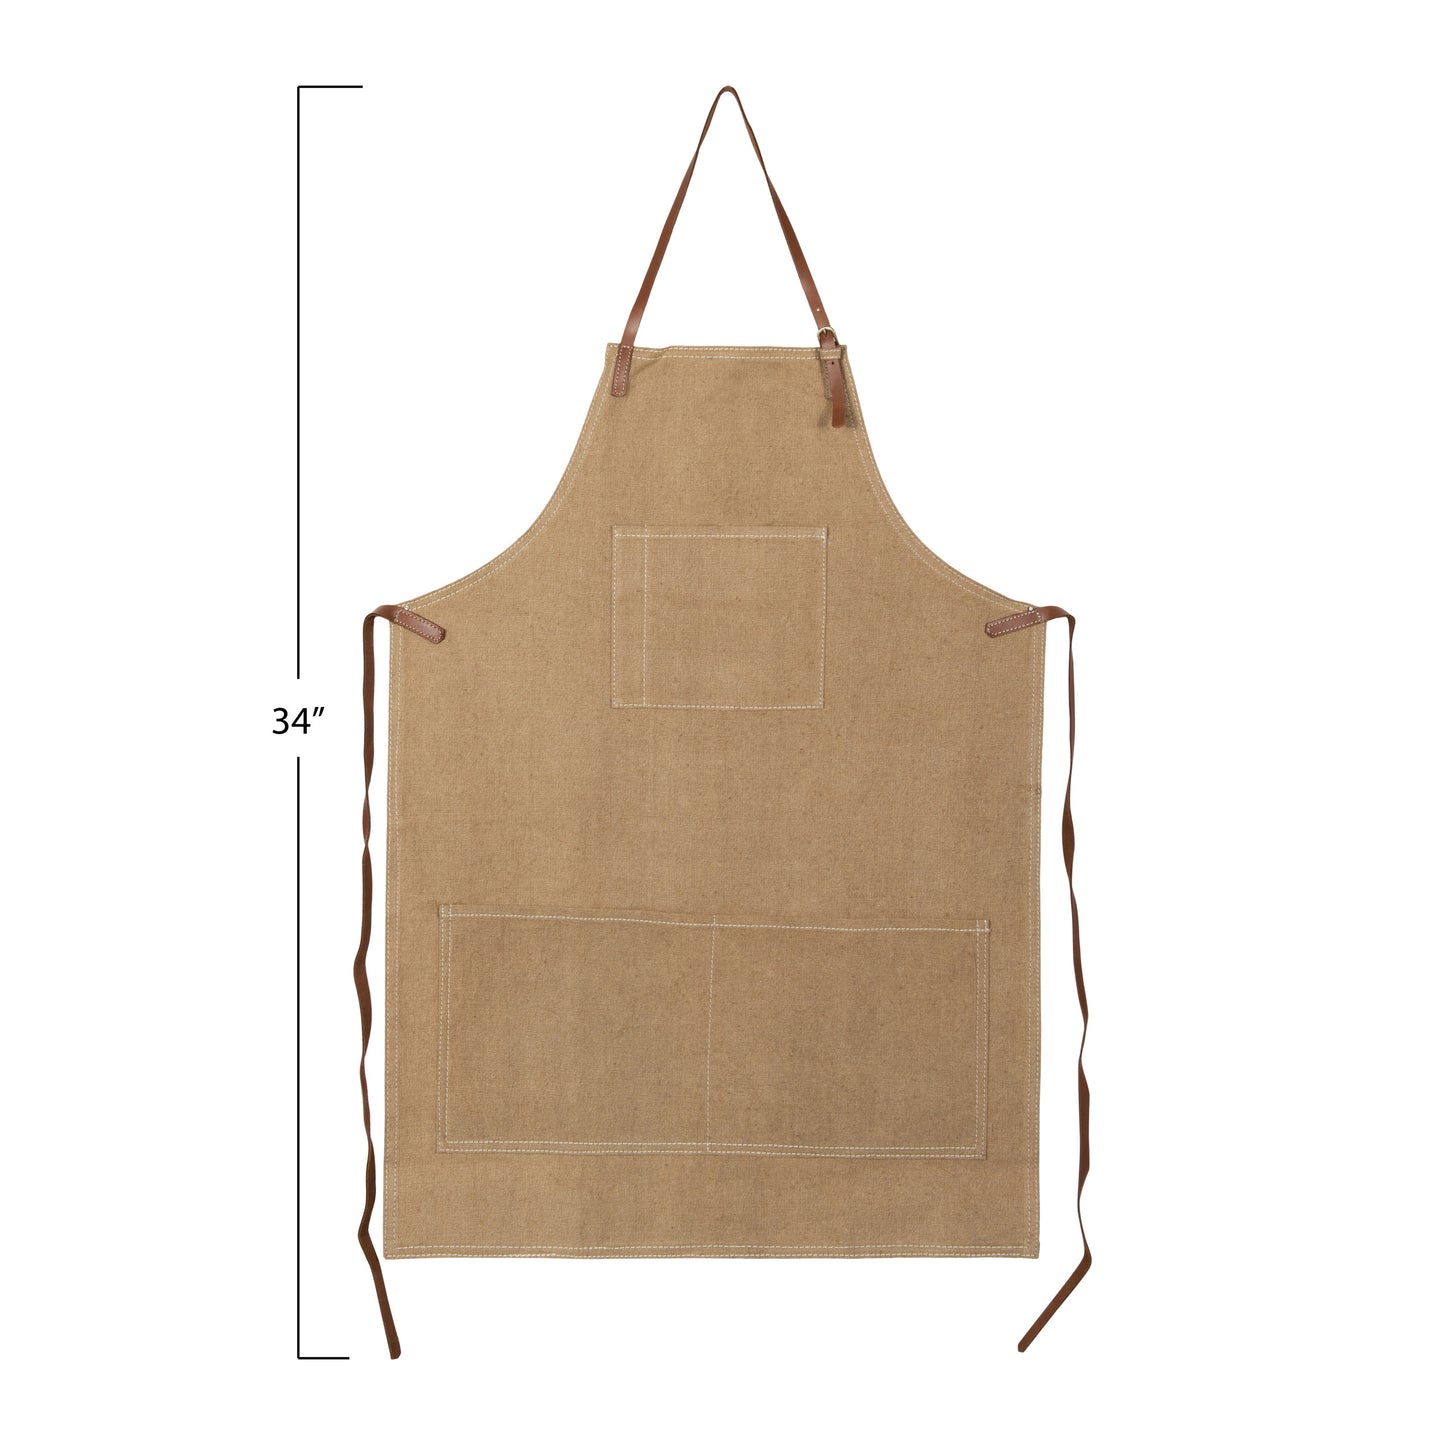 Cotton Canvas Apron with Pockets and Leather Ties